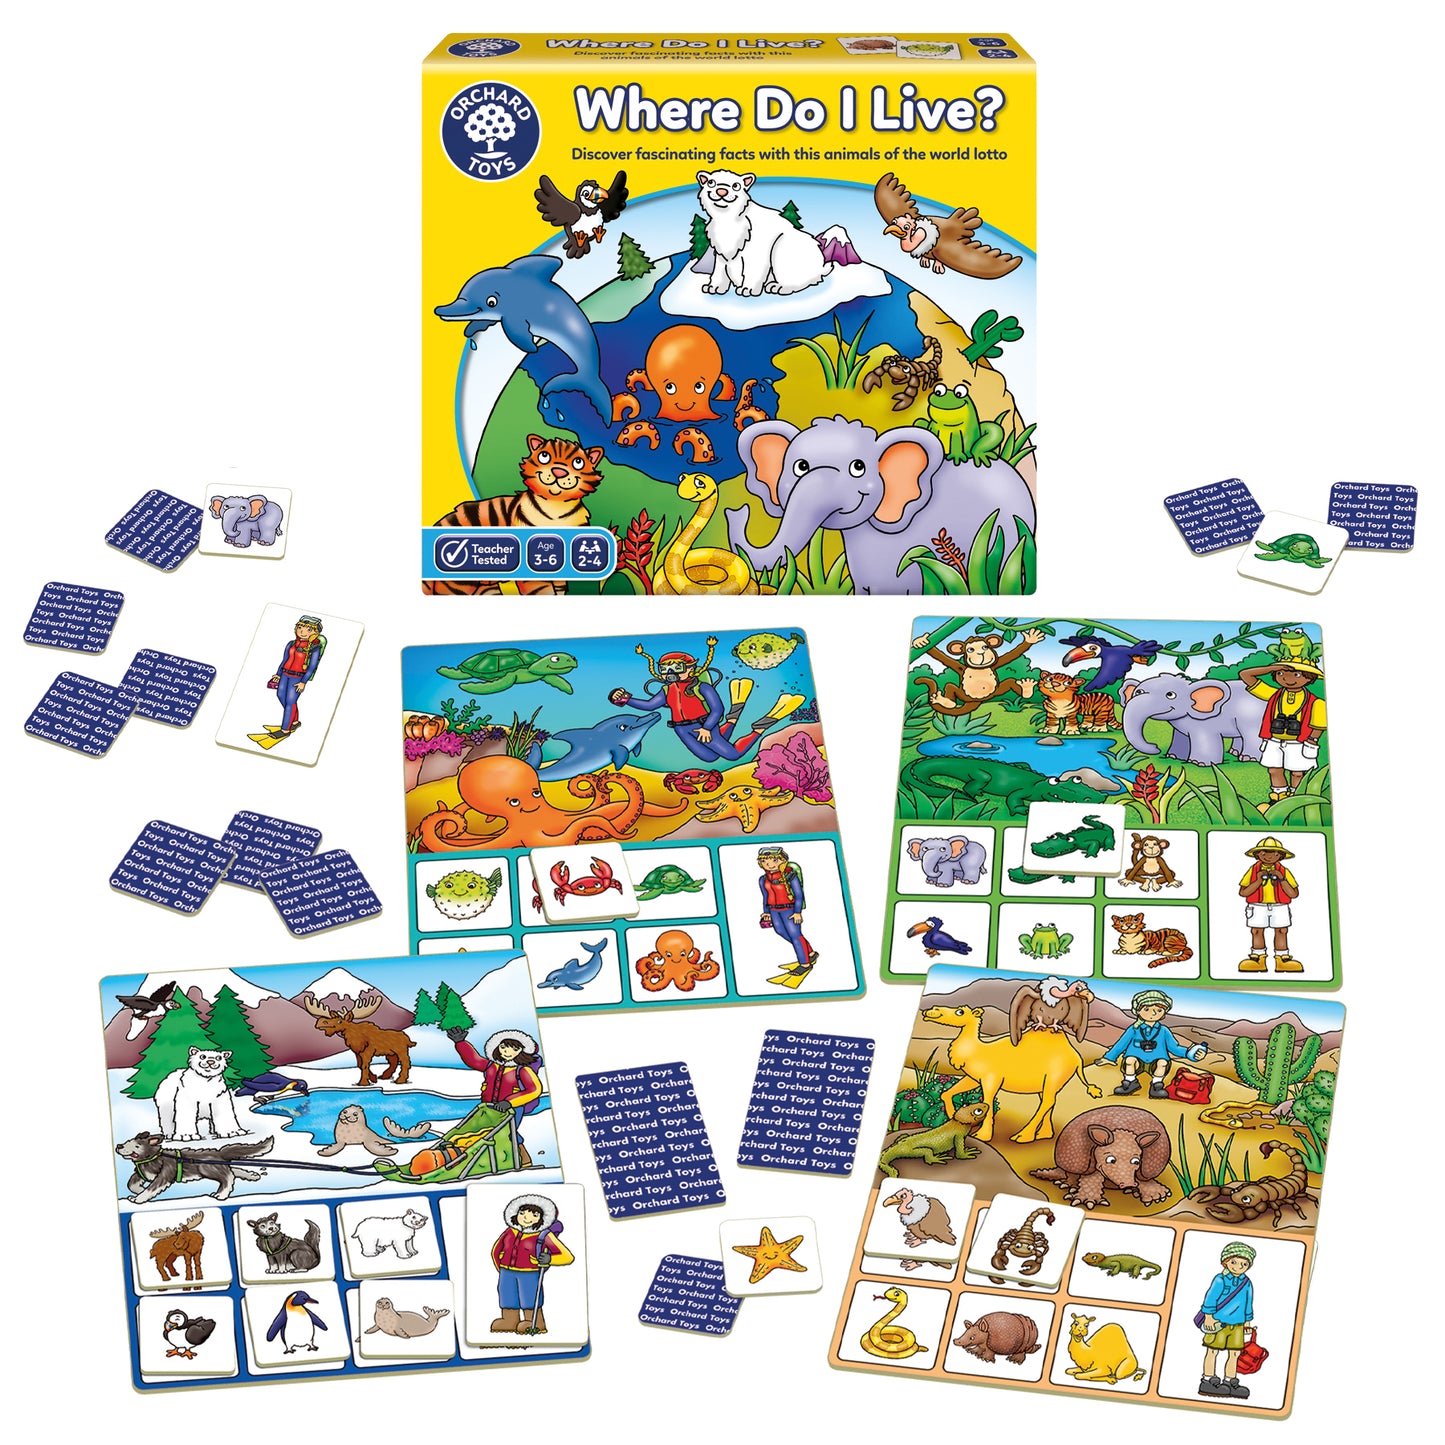 Orchard Toys Where Do I Live? Animals of The World Lotto Game